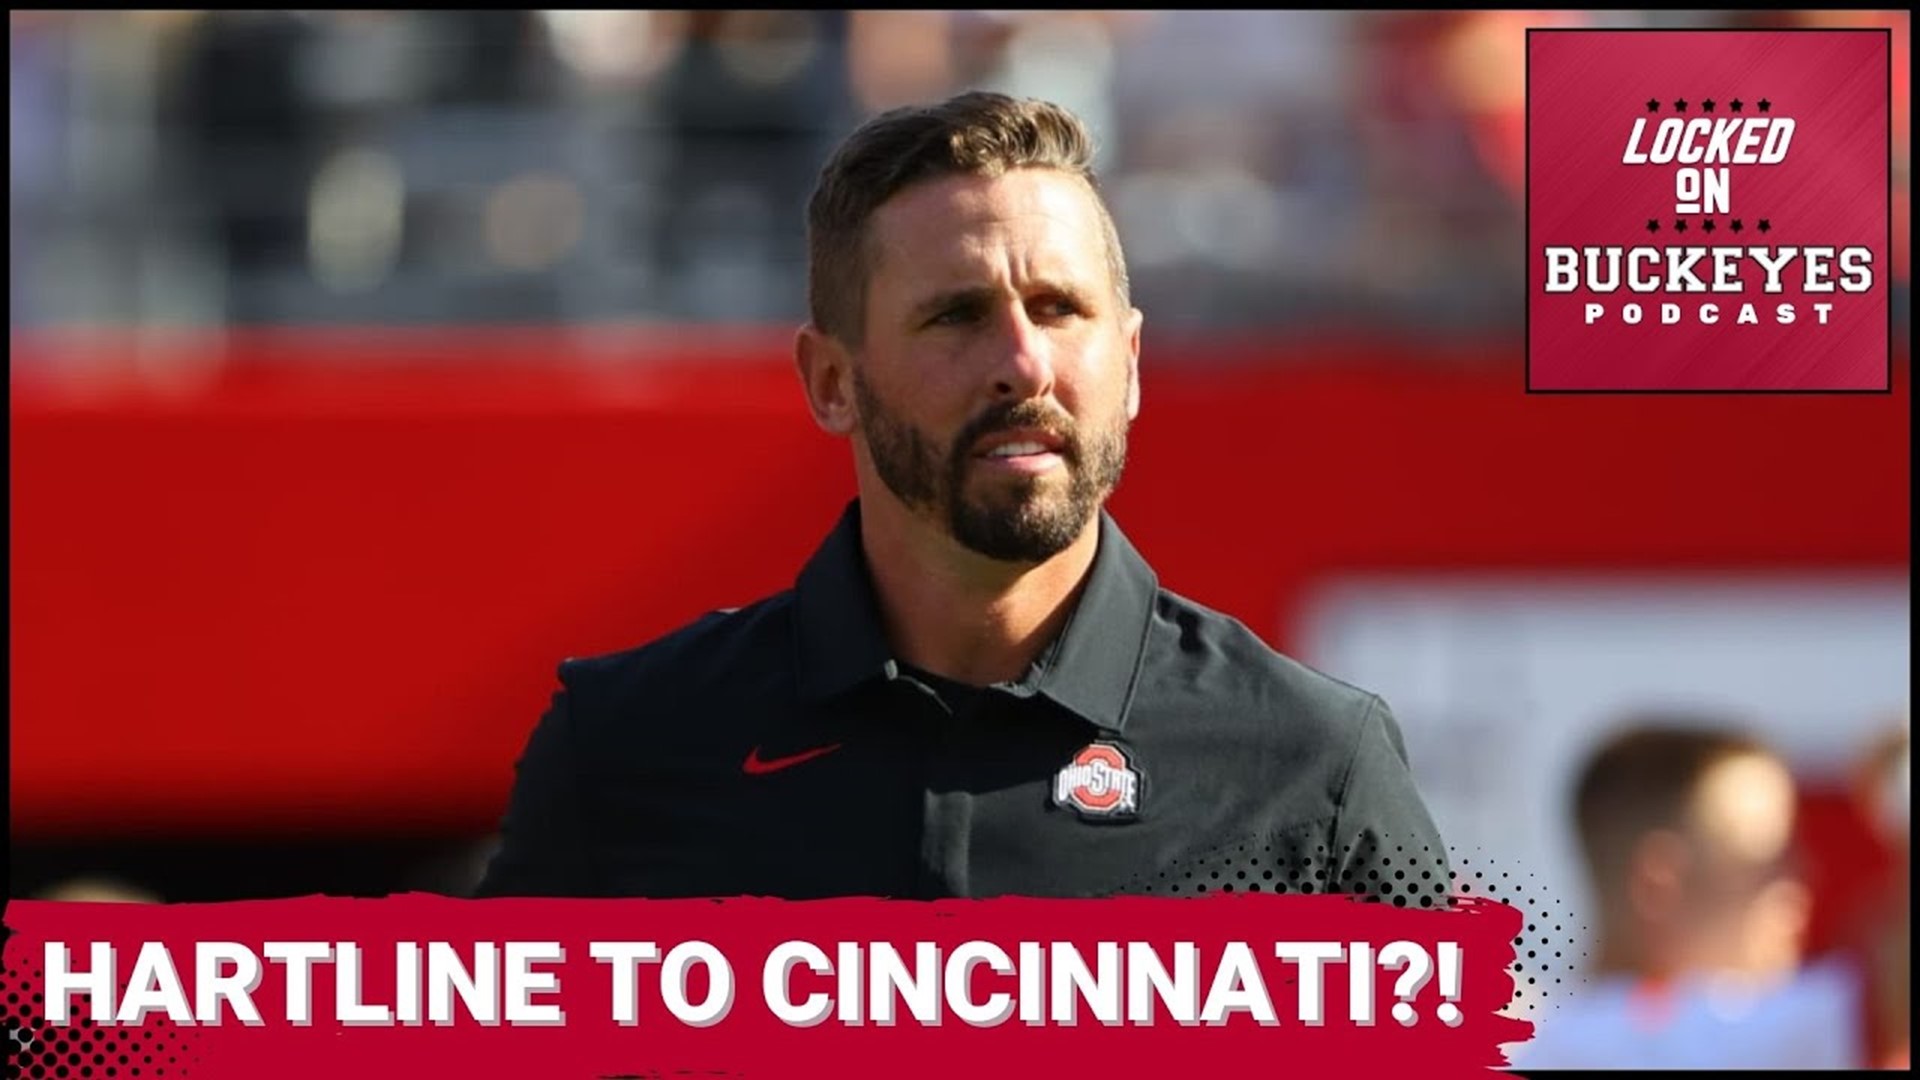 We discuss the future for coach Brian Hartline in this edition of the Locked On Buckeyes podcast.